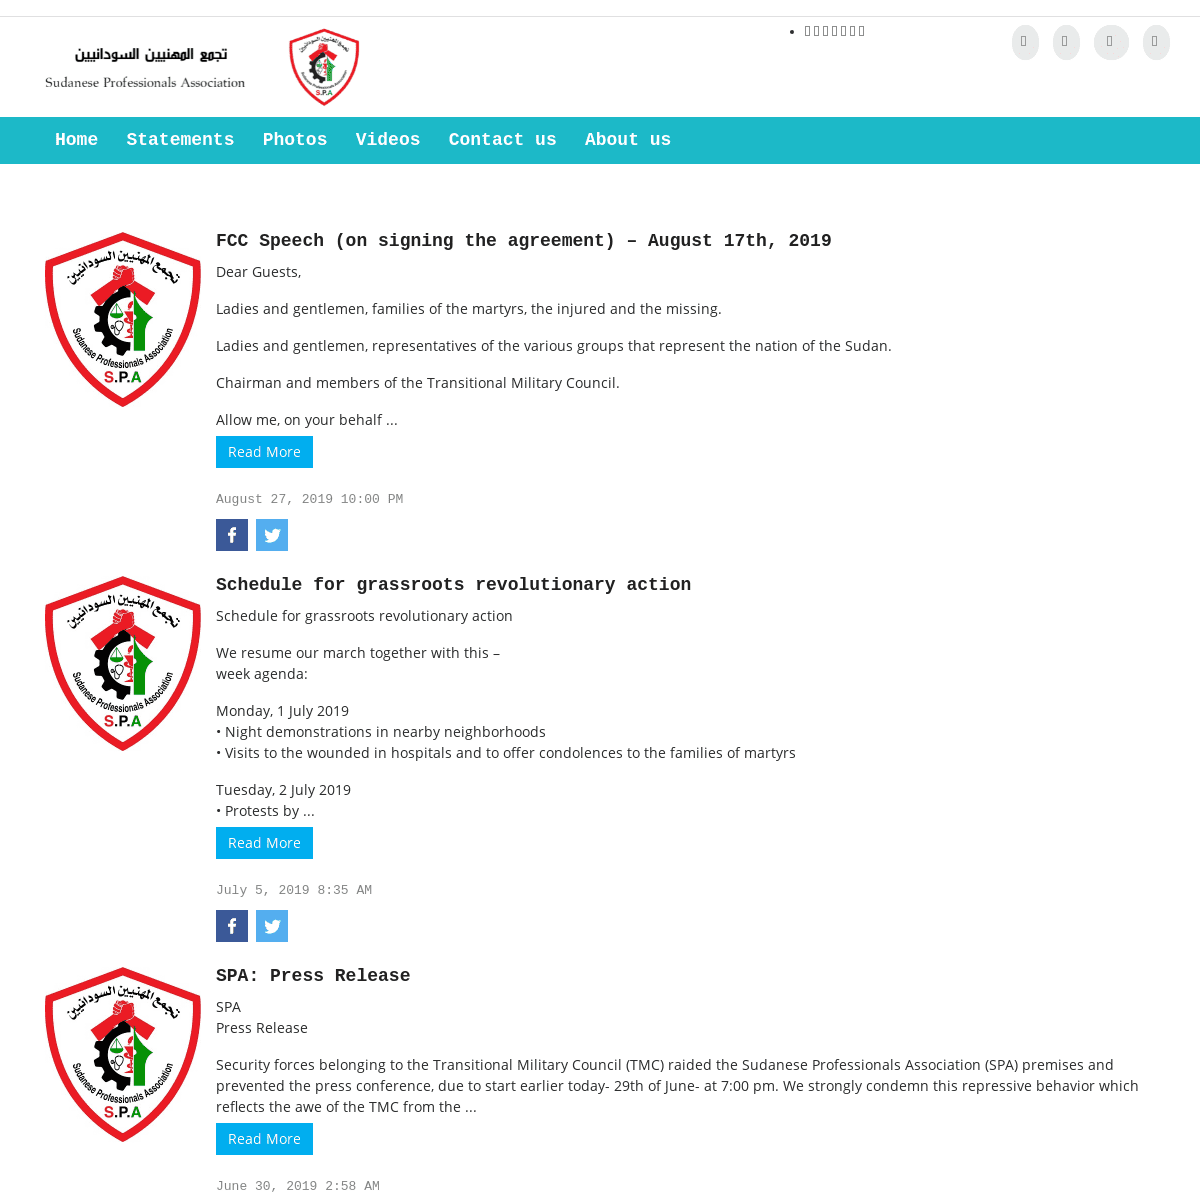 A complete backup of https://sudaneseprofessionals.org